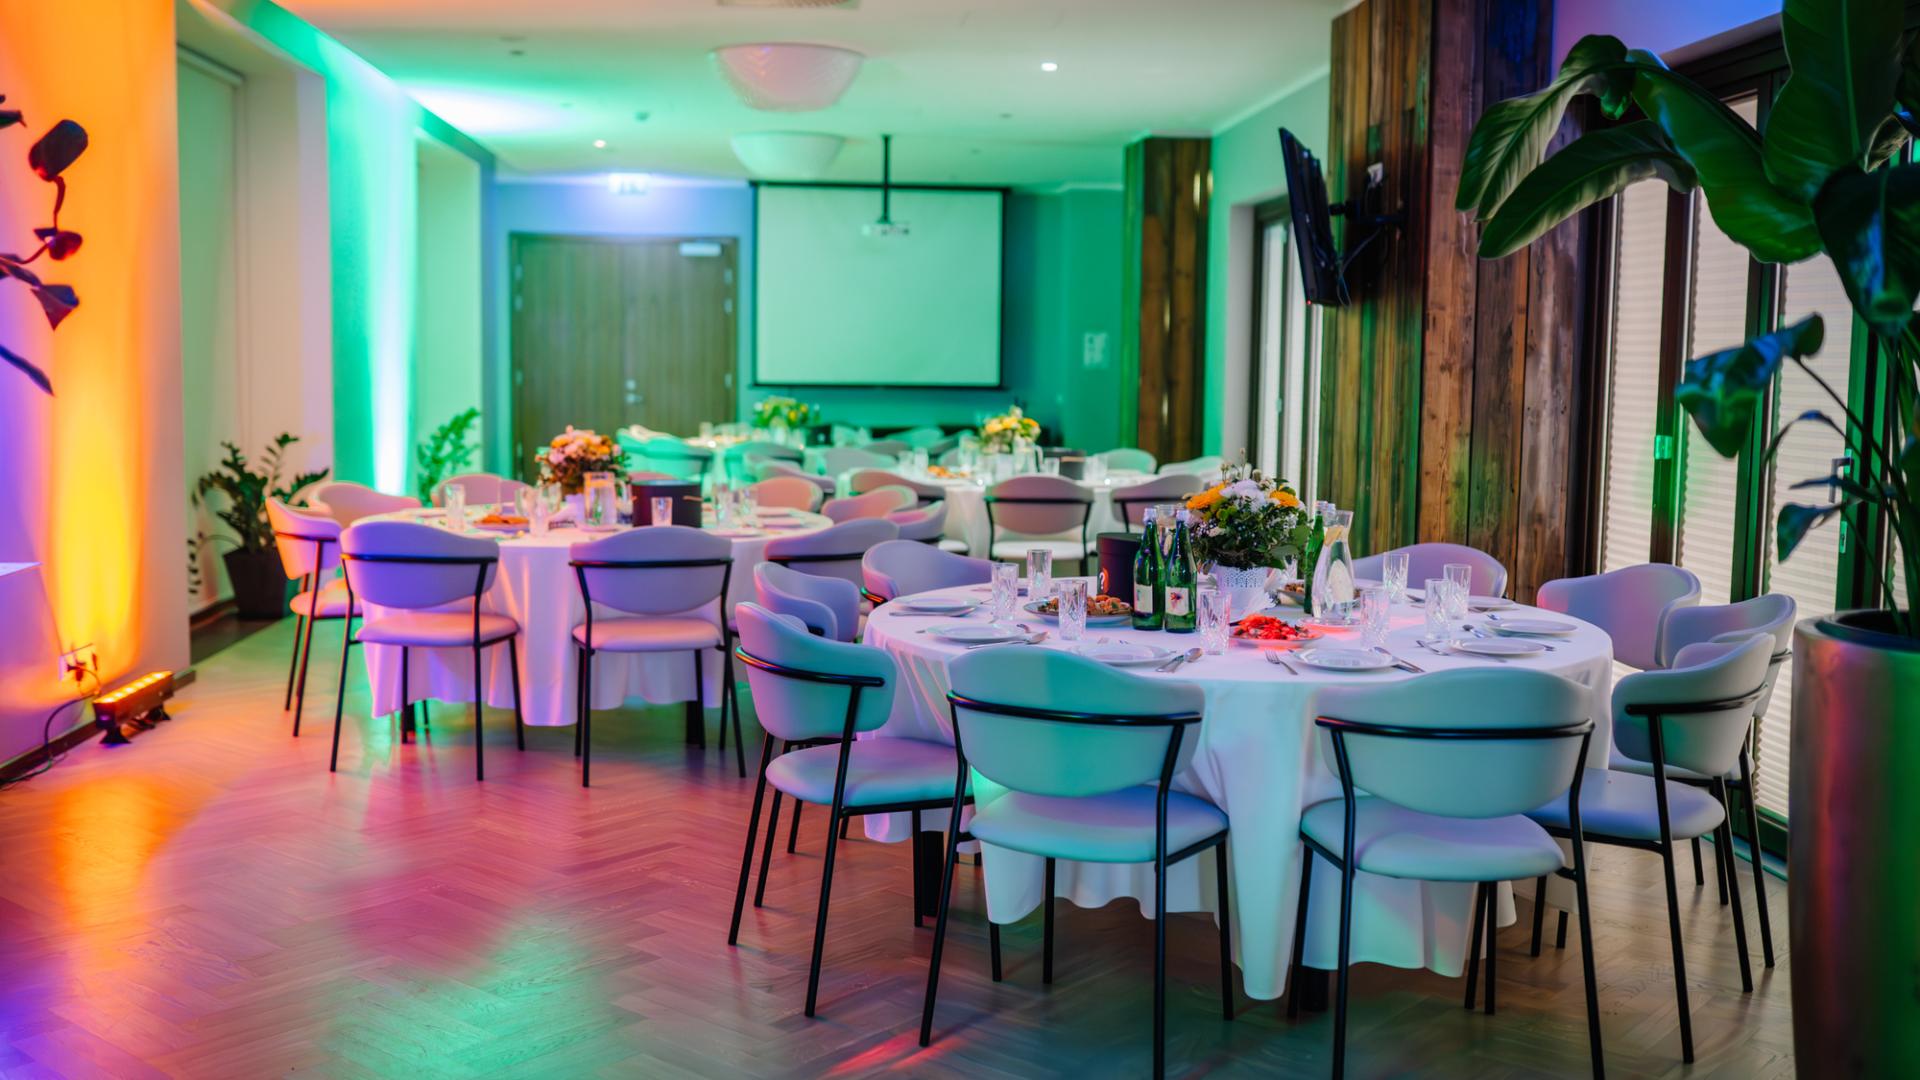 Dry Hire Venues for Hire in Central London